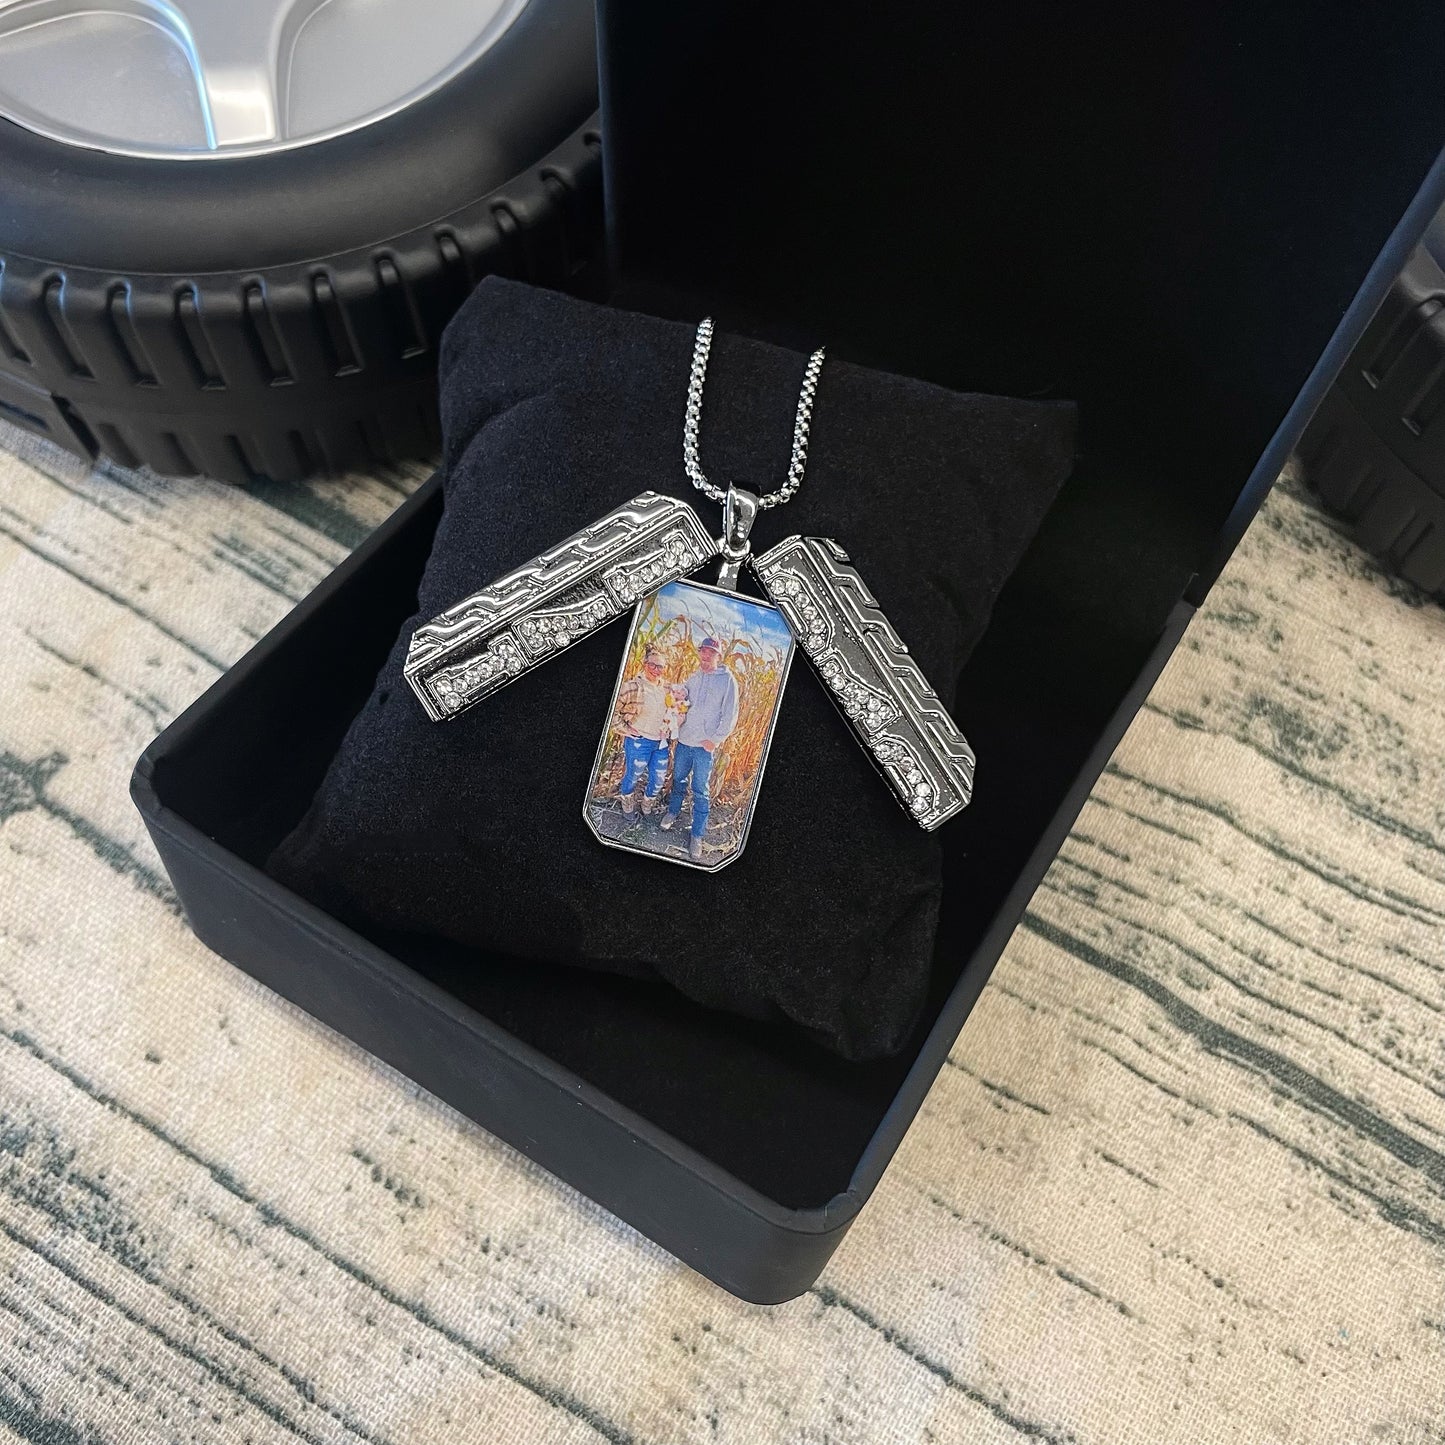 Custom Photo Pendant Necklace Present for Father's Day